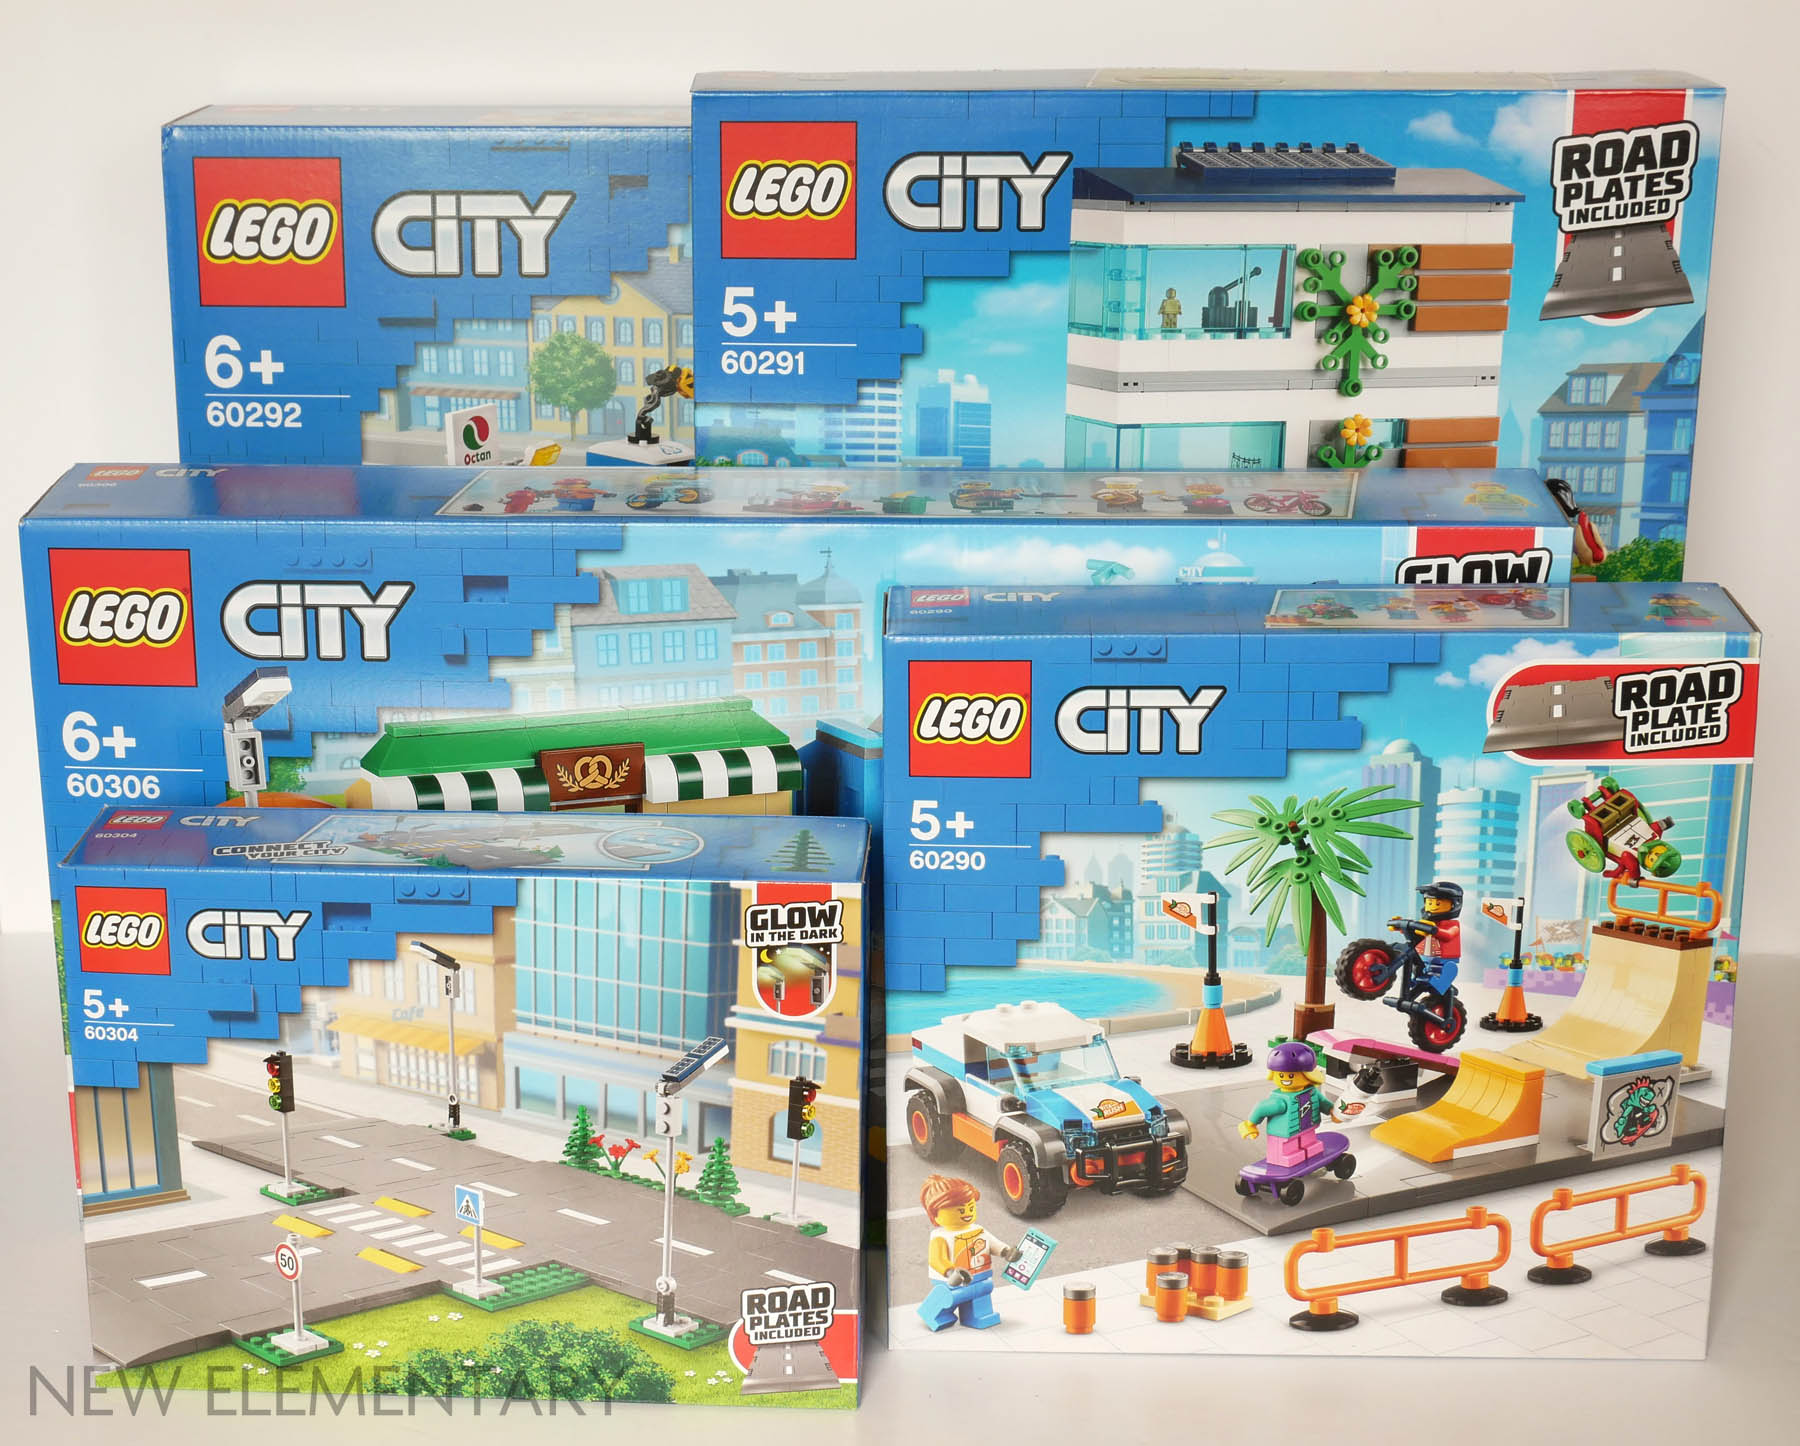 Lego® City Review: 60290 Skate Park & 60291 Family Home | New Elementary:  Lego® Parts, Sets And Techniques